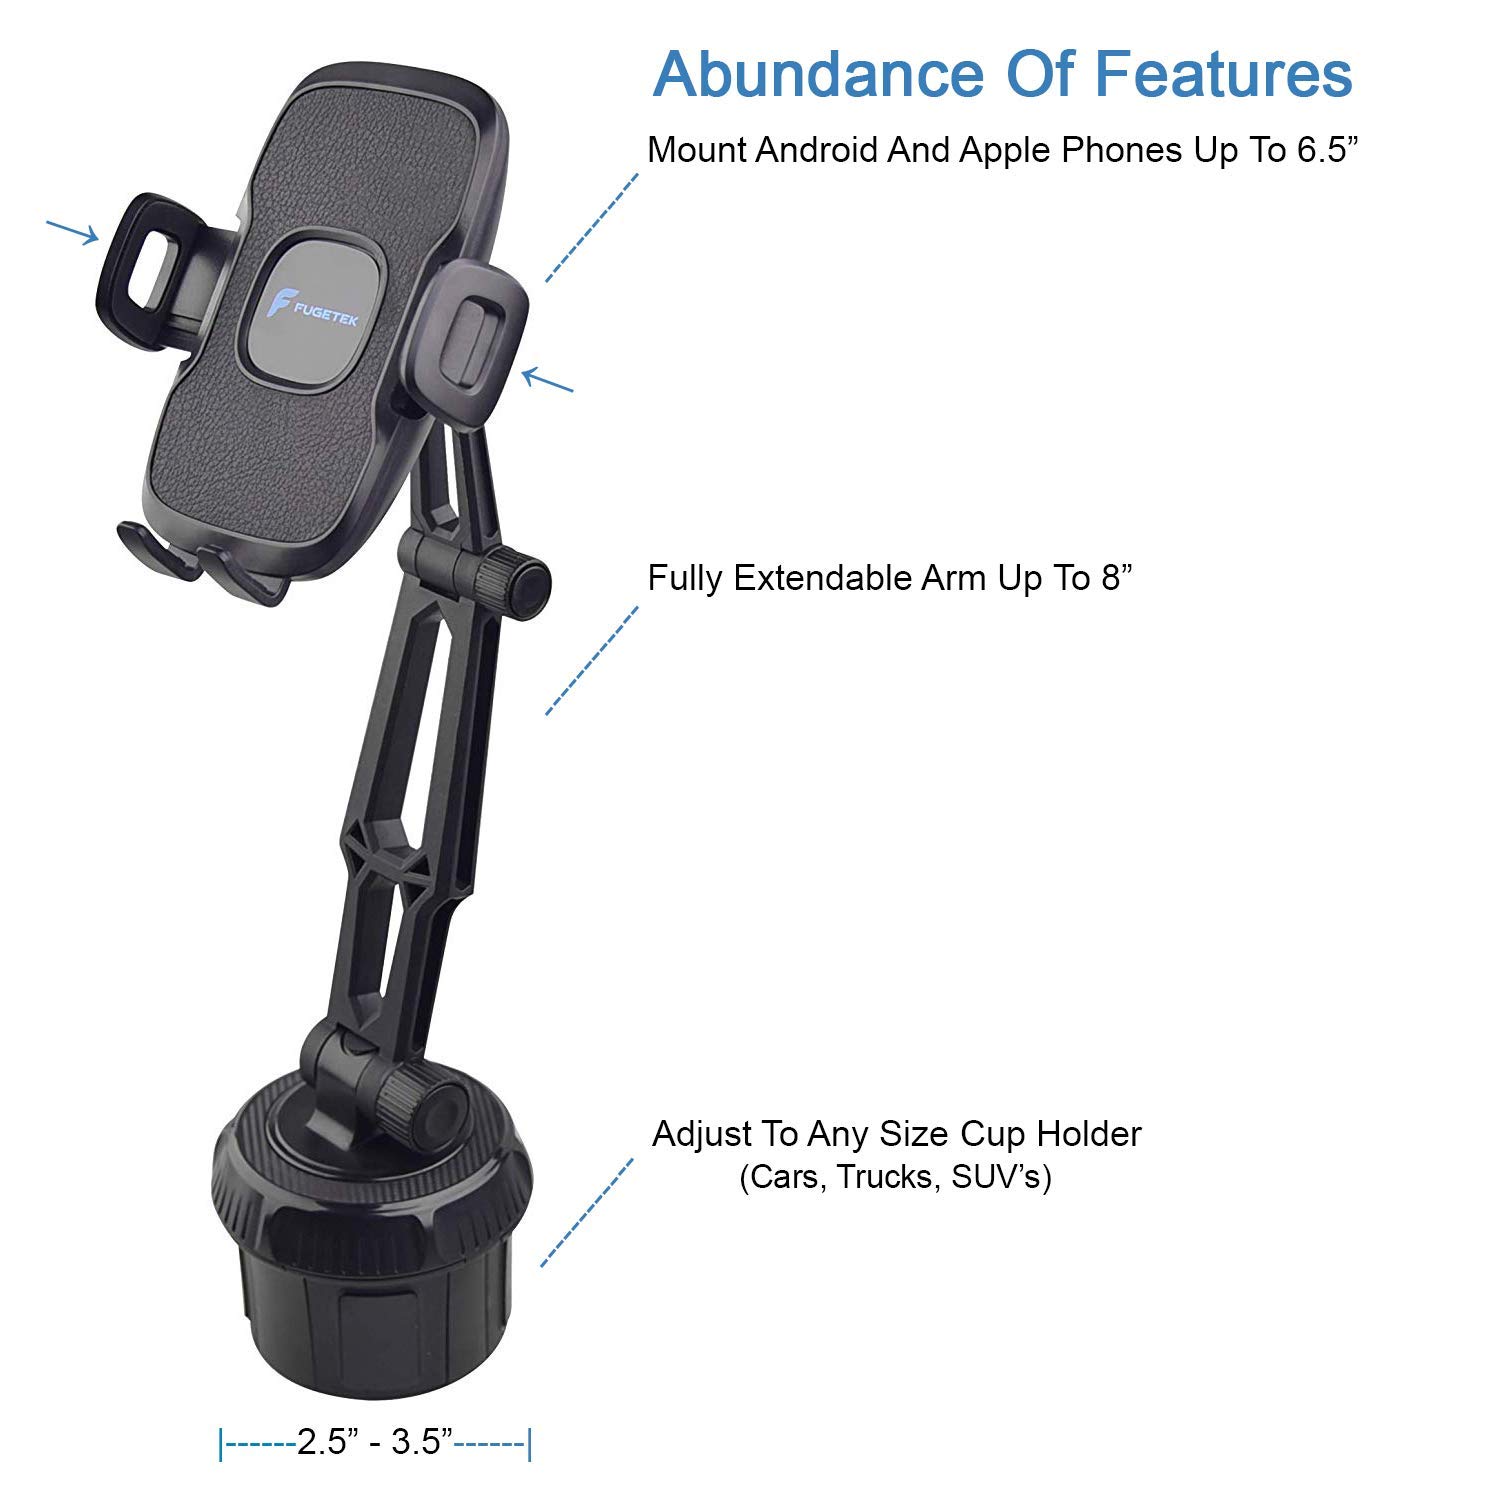 Fugetek Car Cup Holder Phone Mount Cradle, Universal Base, Hands-Free, Adjustable, 360 ° Rotatable, Compatible with iPhone 12, 11, XR/XS Max, XS/X, 8/8+, Samsung Galaxy S10,S9, HTC, GPS, Black